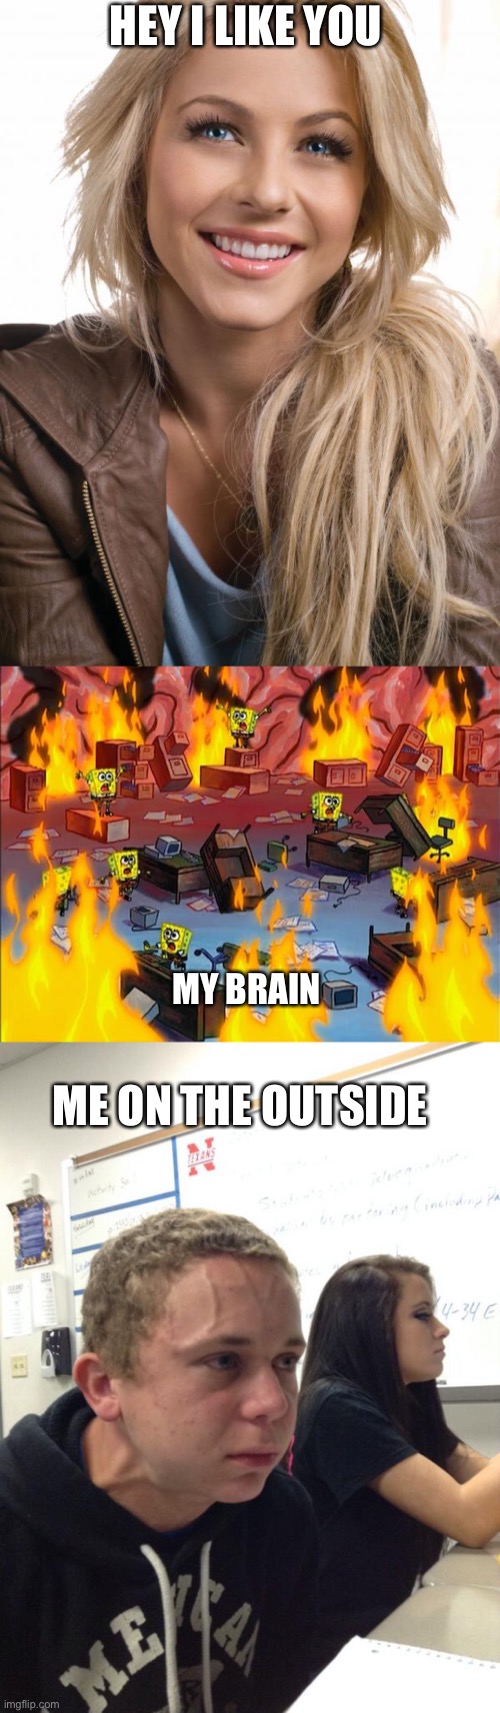 HEY I LIKE YOU; MY BRAIN; ME ON THE OUTSIDE | image tagged in memes,oblivious hot girl,spongebob fire,hold fart | made w/ Imgflip meme maker